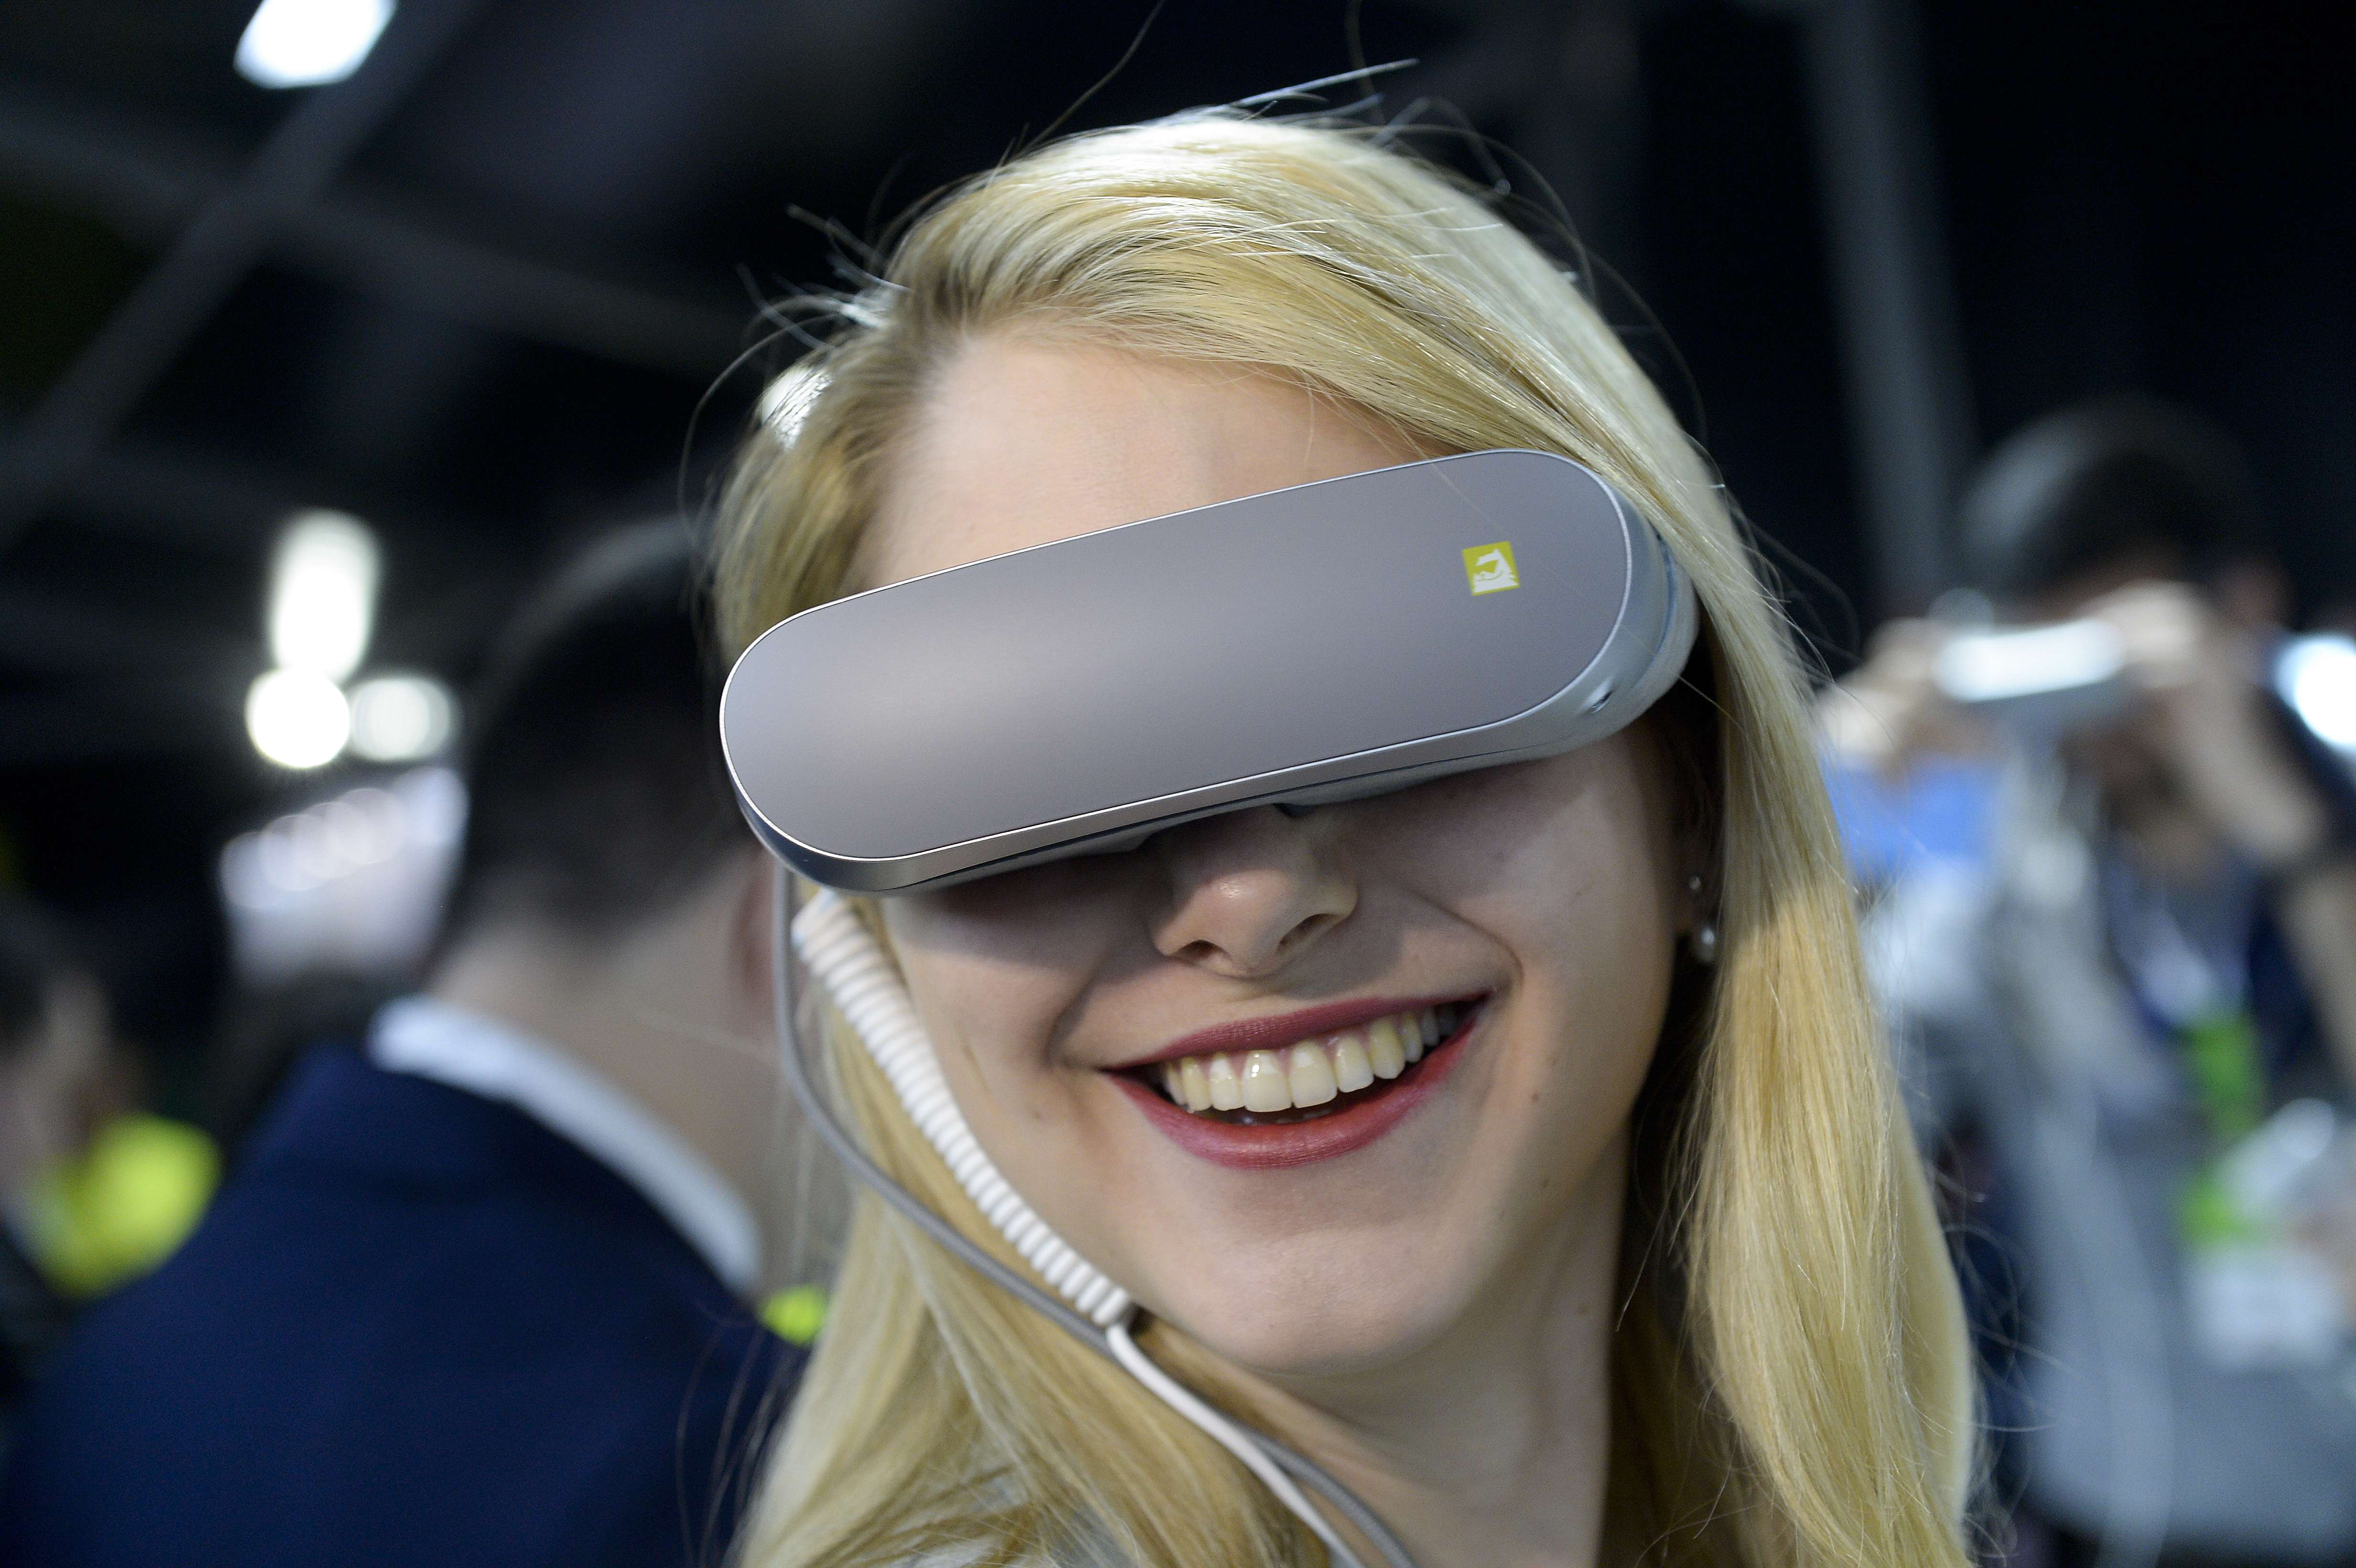 A visitor uses LG’s new 360 VR device at the Mobile World Congress in Barcelona. Photo: AFP